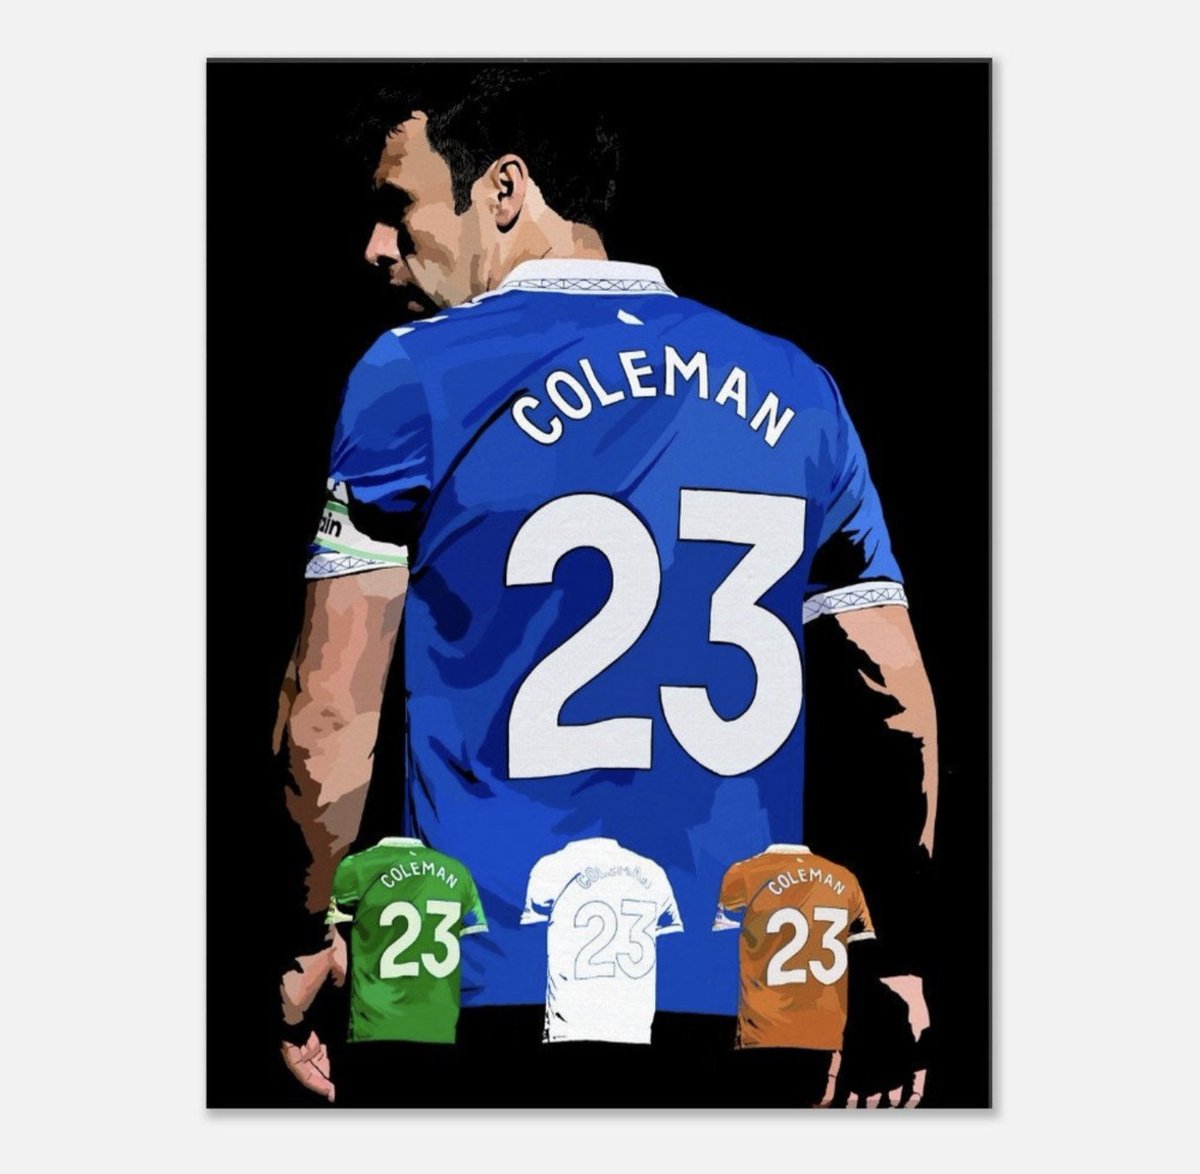 New Seamus Coleman products available now!!! This has taken roughly around a week to draw. I hope you enjoy it as much as I enjoyed drawing the captain! thedsgdoodlecompany.etsy.com